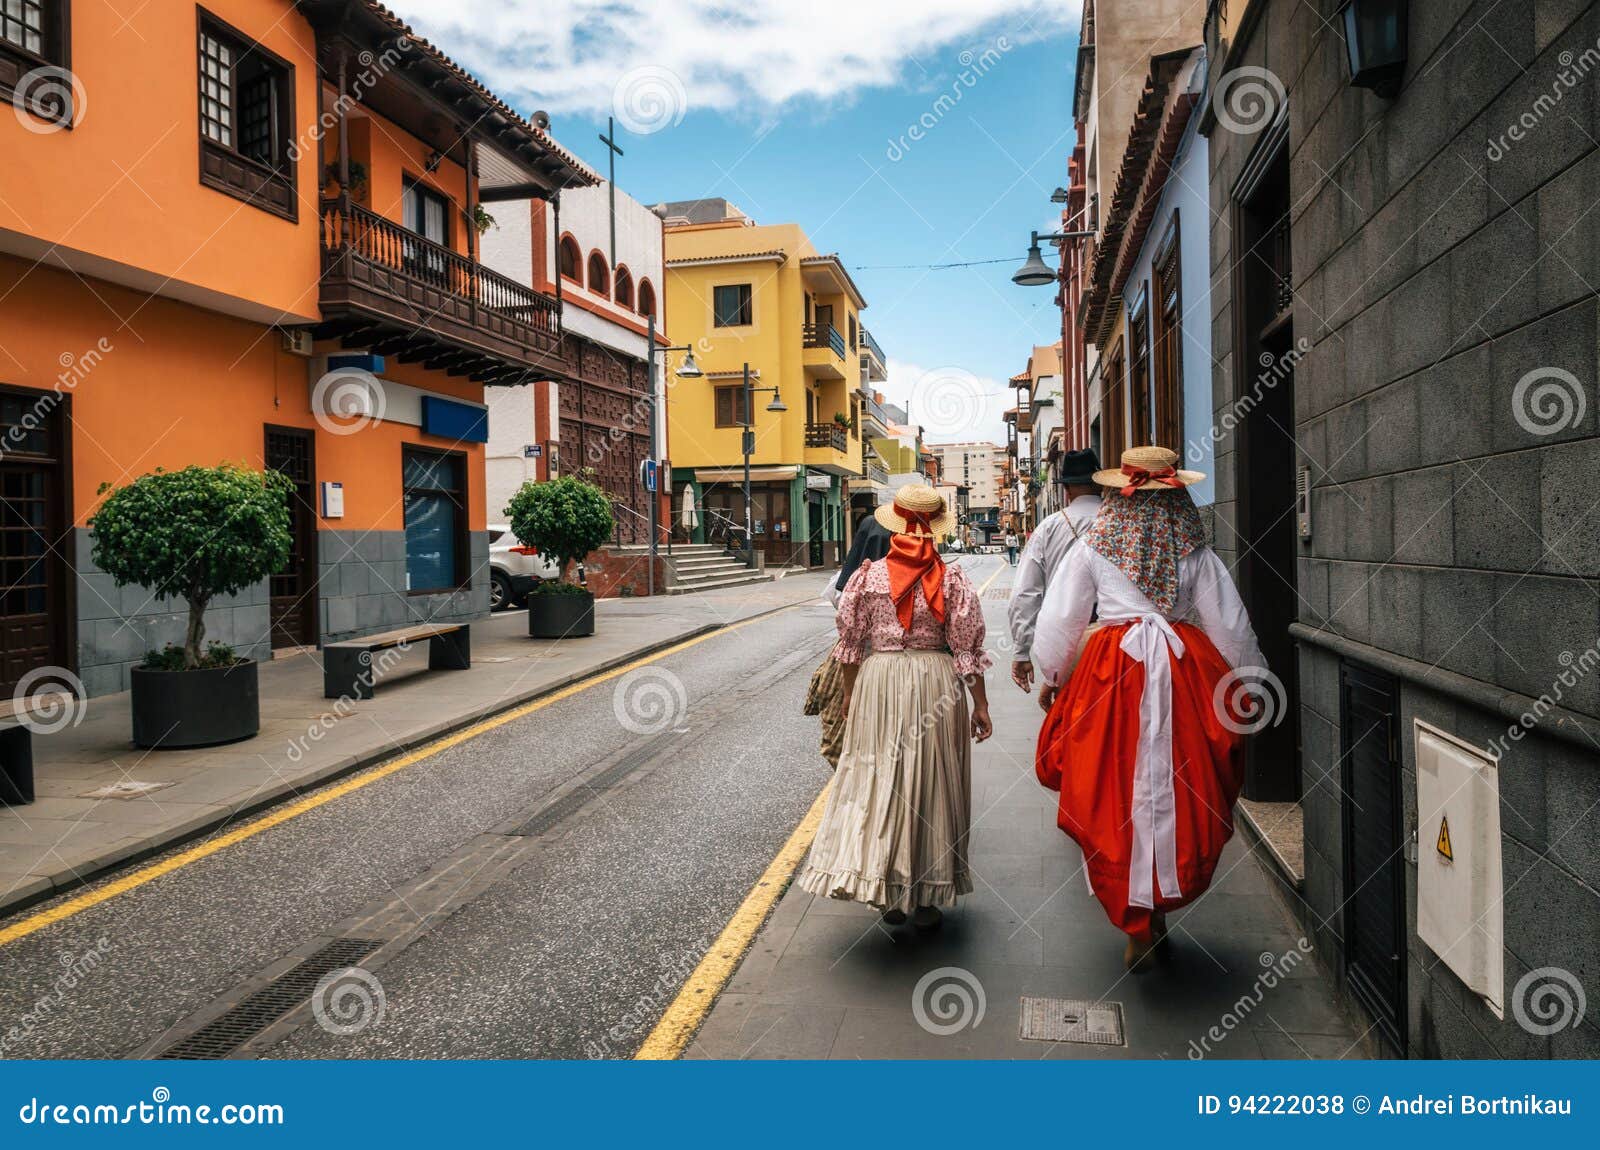 locals in canarian traditional clothes walk along the street of puerto de la cruz. day of canary islands. tenerife.